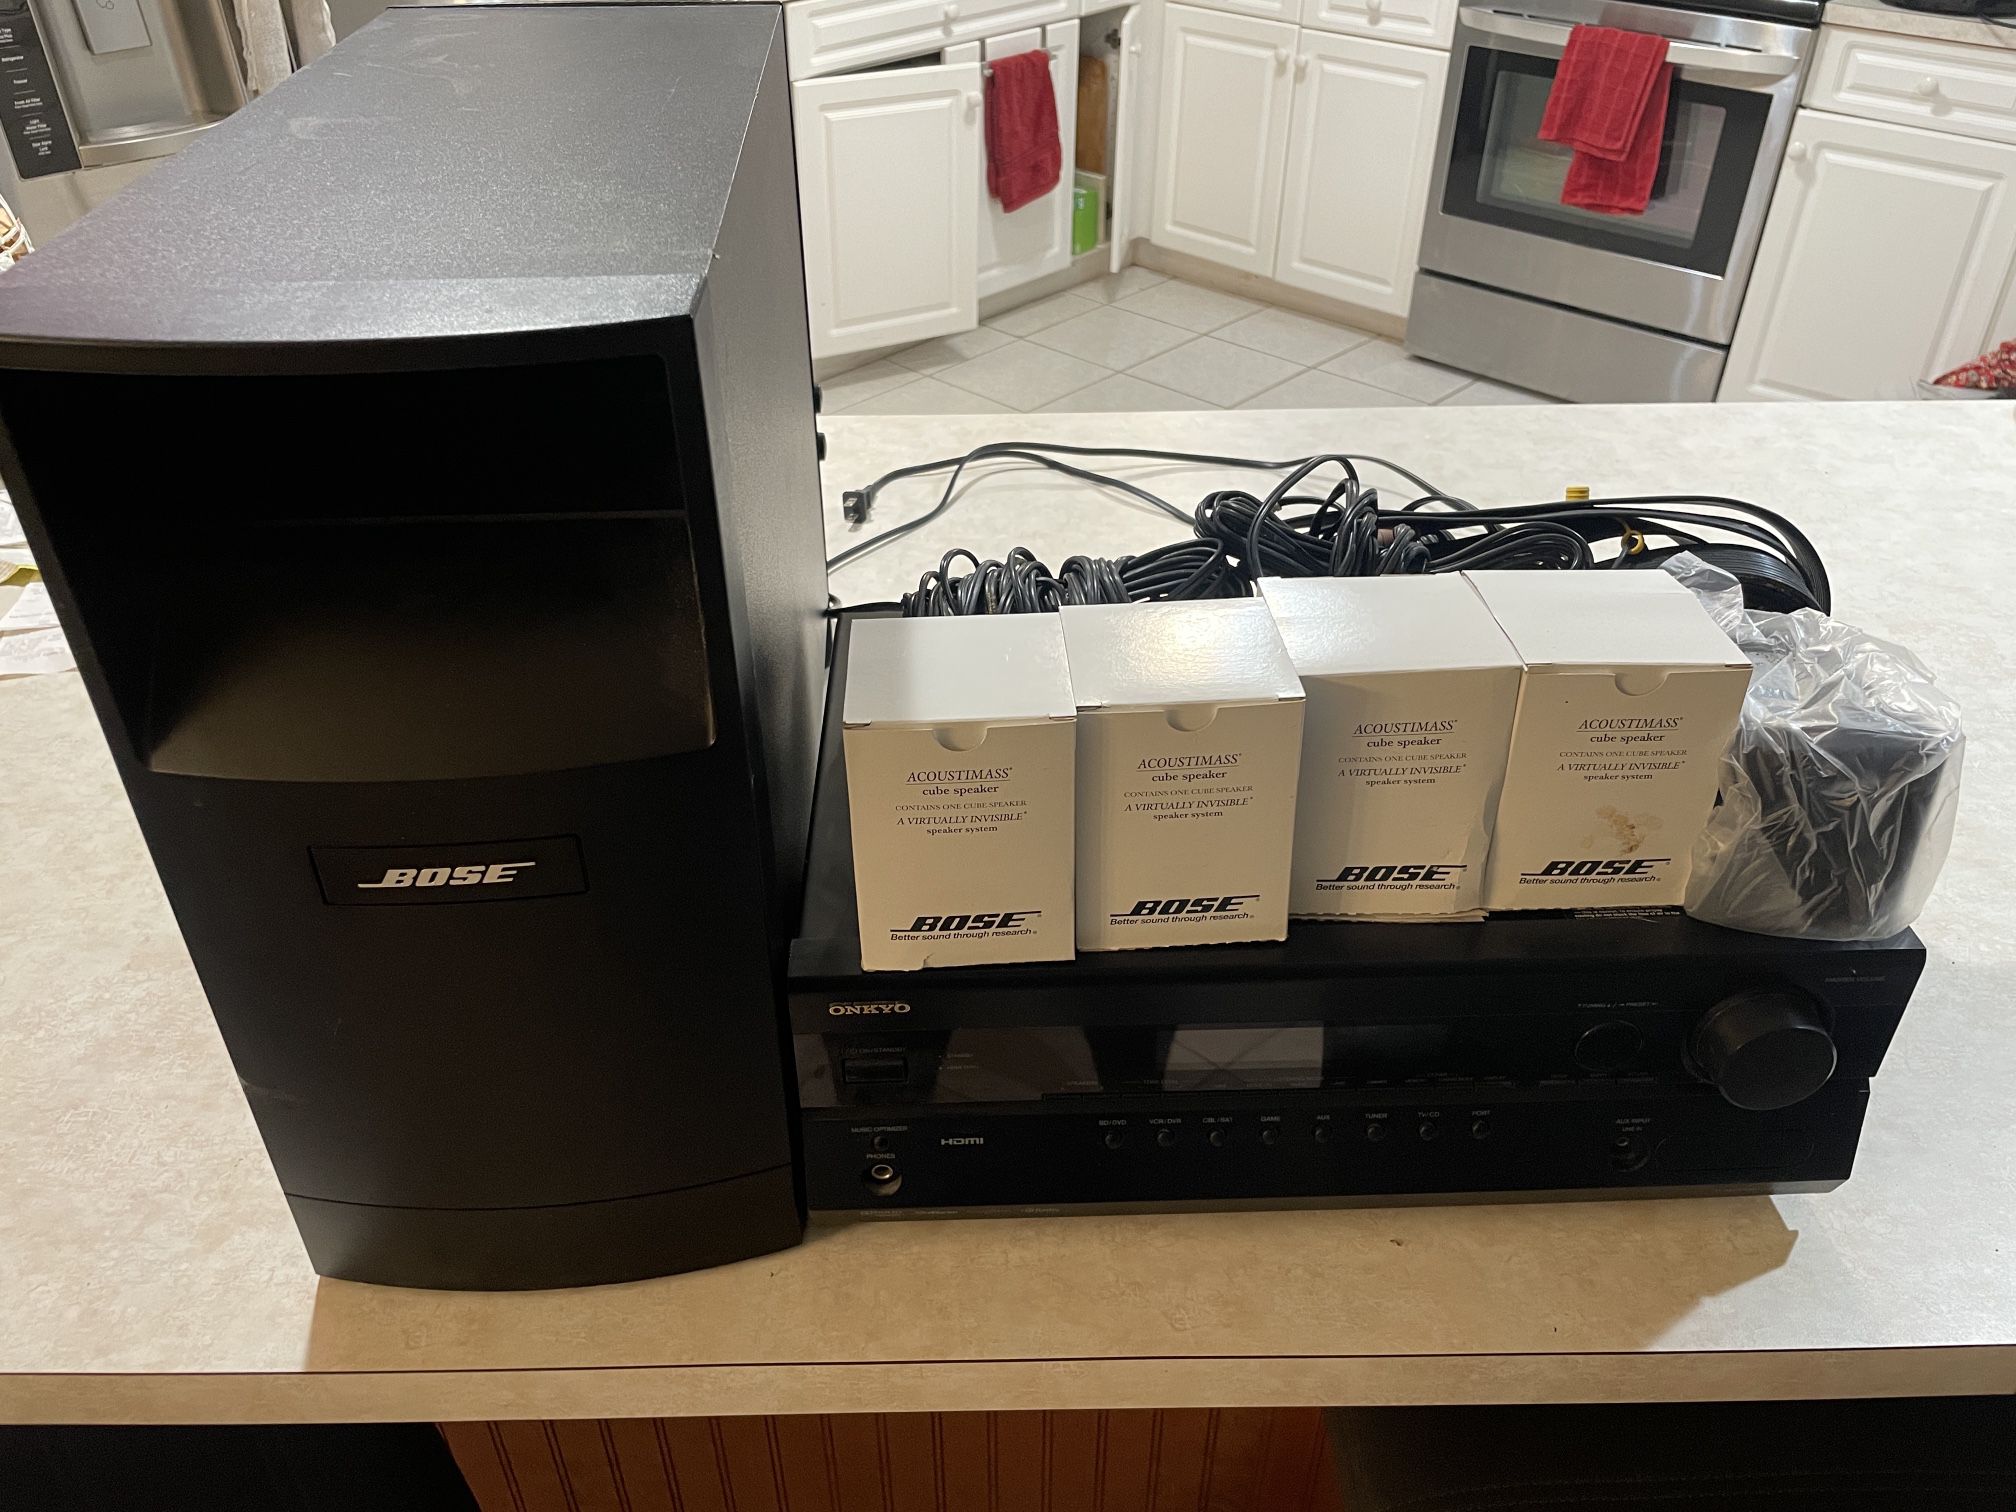 BOSE ACOUSTIMASS 6 SERIES IIl HOME THEATER 5 SPEAKER SYSTEM + SUBWOOFER + CABLES WITH Onkyo HT RC230 5.1 Channel Receive 